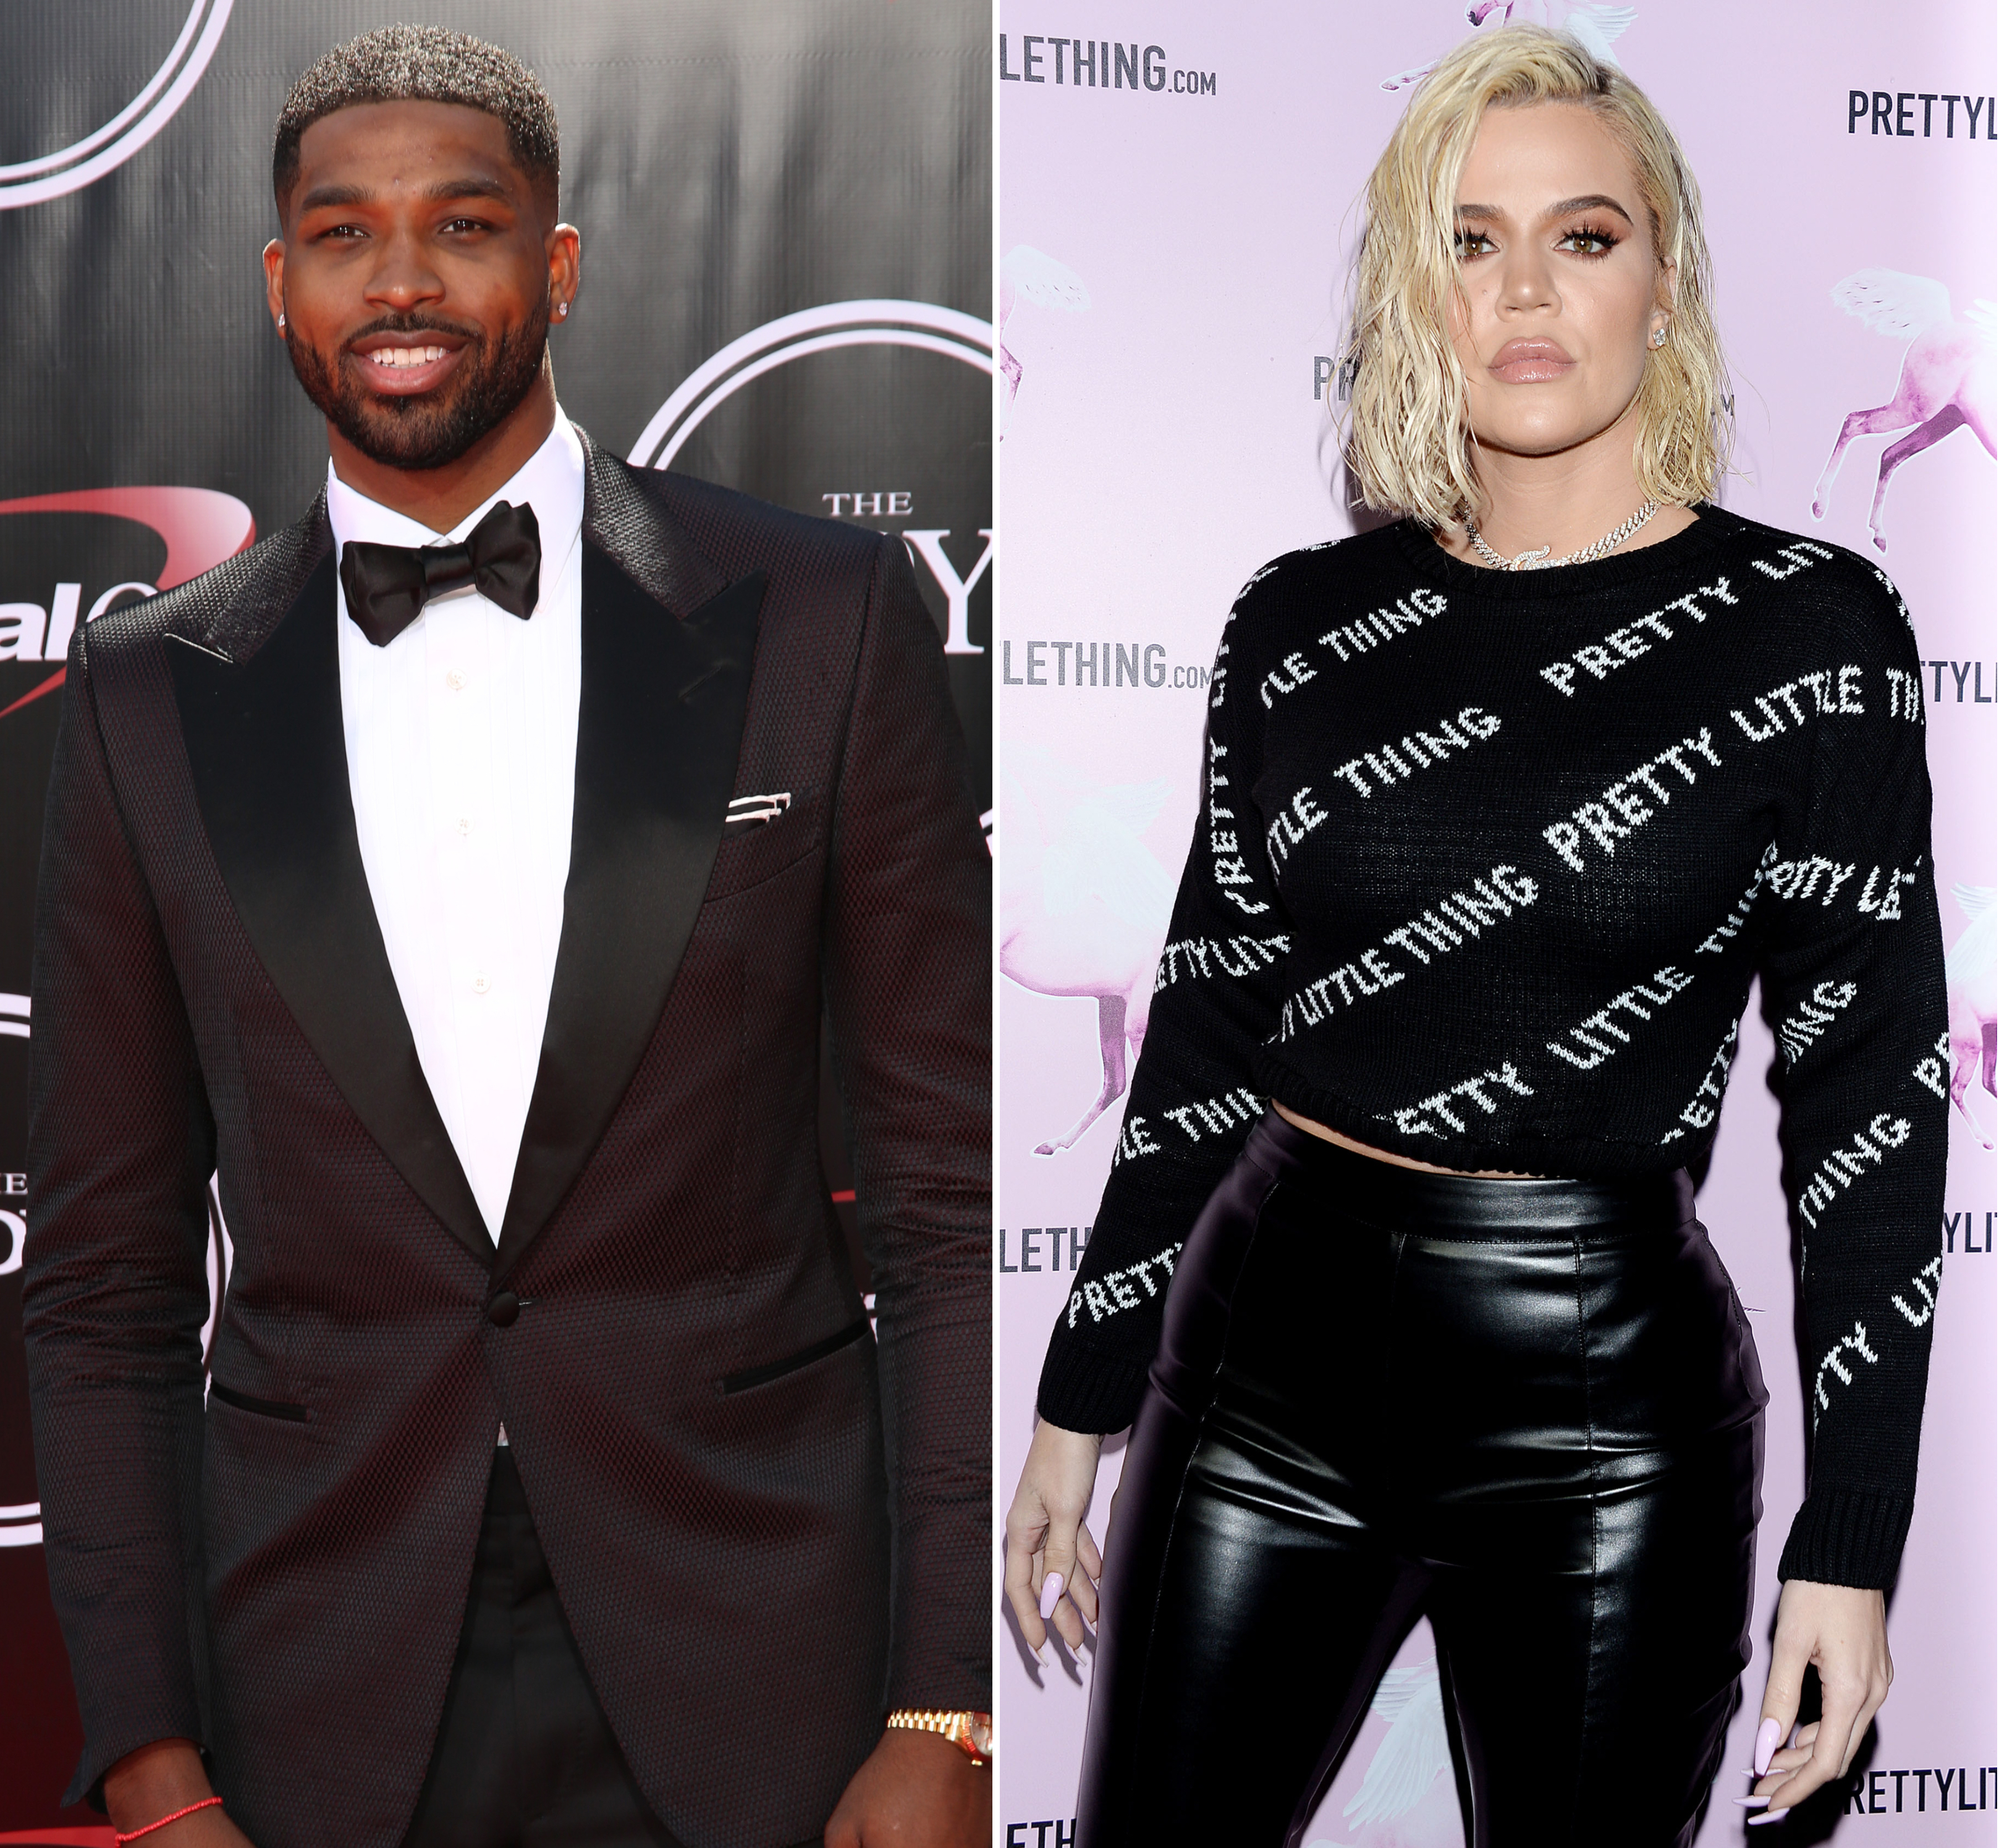 Tristan Thompson Comments on Khloe's Sexy Selfie With Malika Haqq